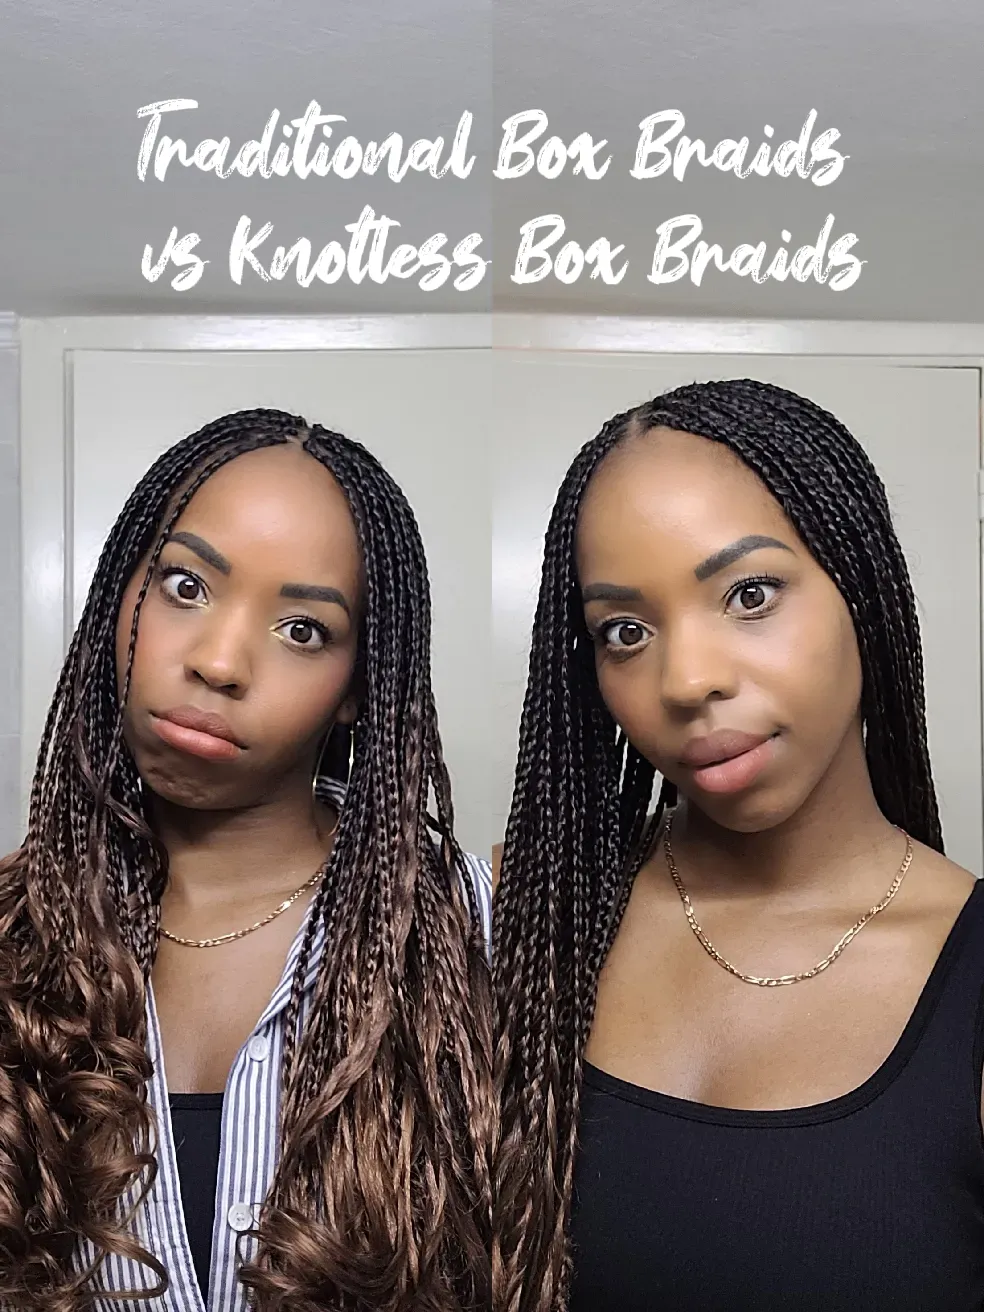 Knotless vs Traditional Box Braids *WATCH BEFORE TRYING* (pics + vids)